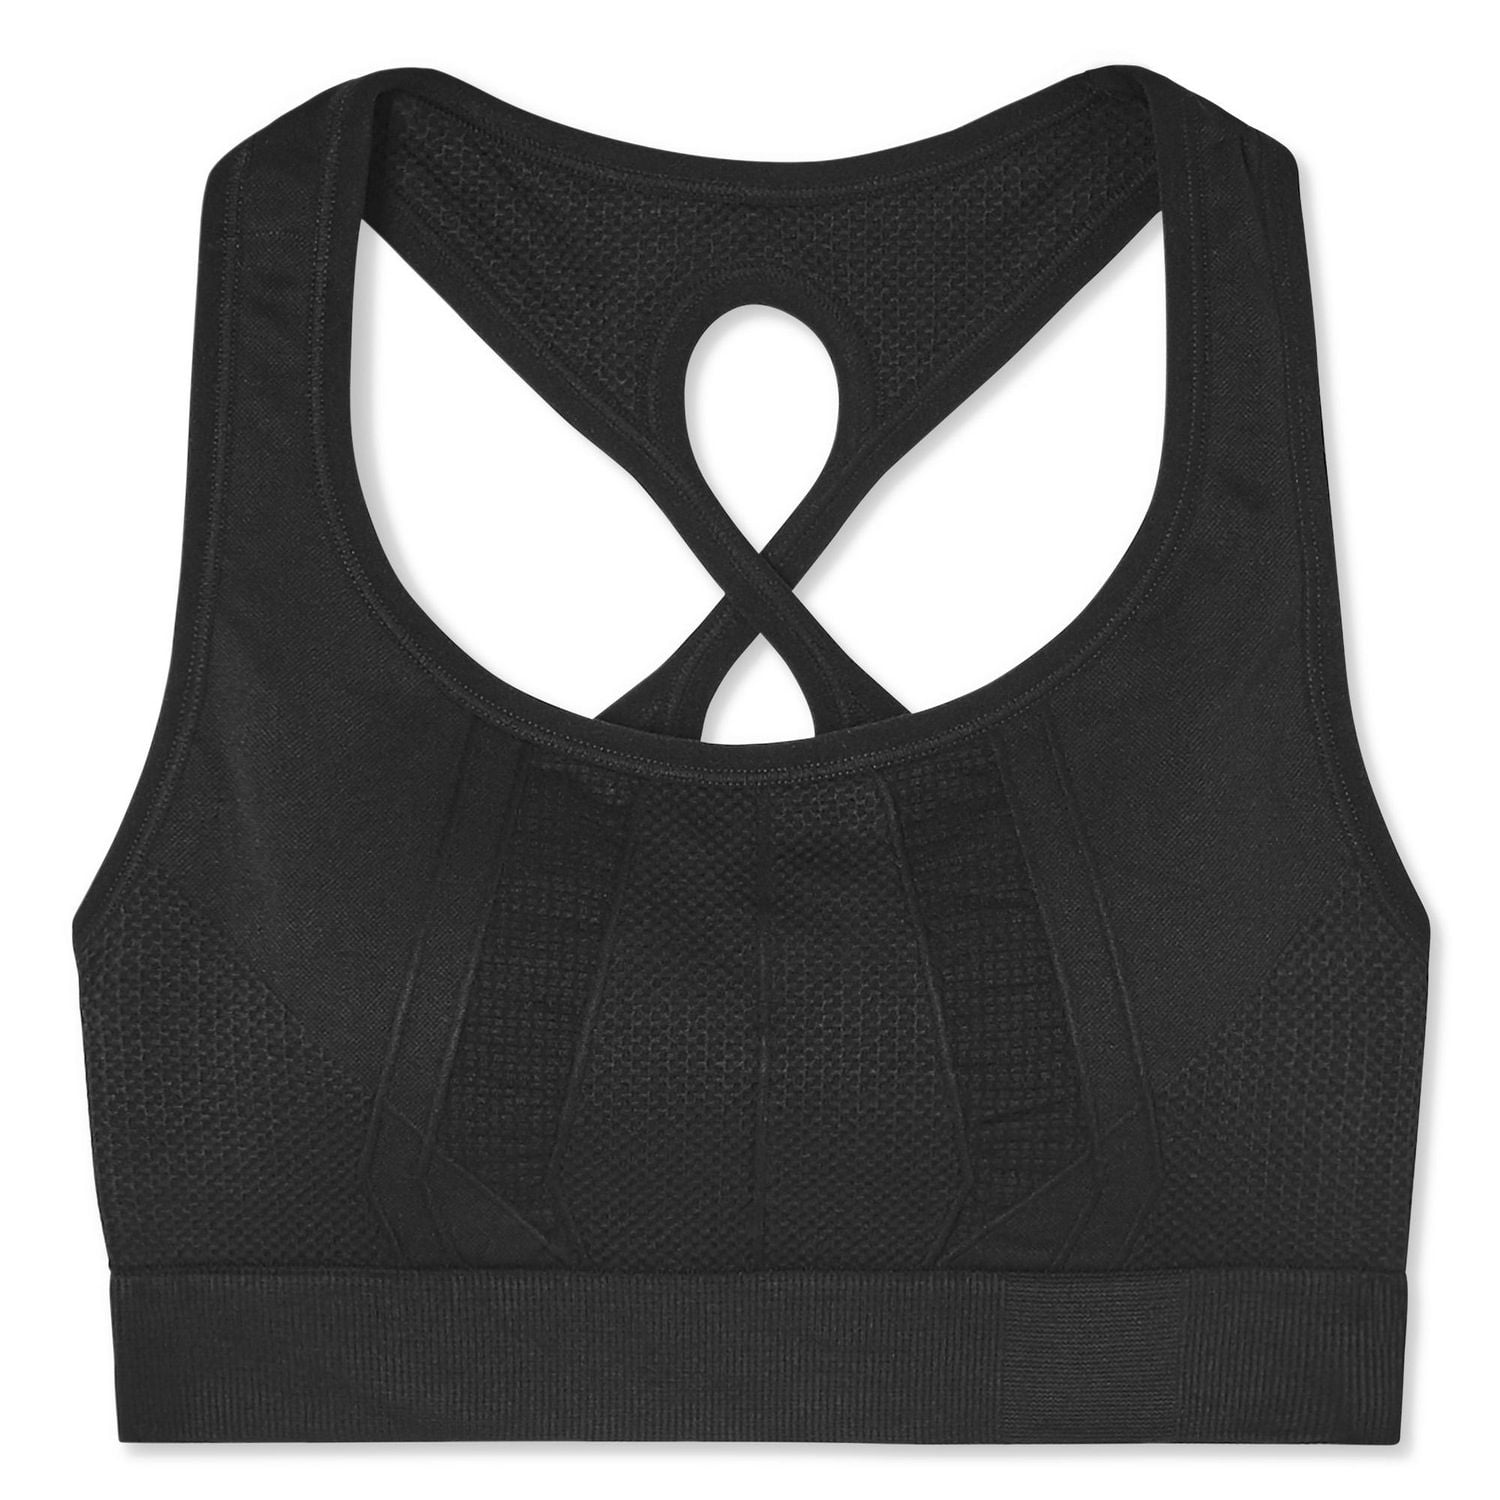 Athletic Works, Intimates & Sleepwear, 2 For 2 Athletic Works Sports Bra  Size Small